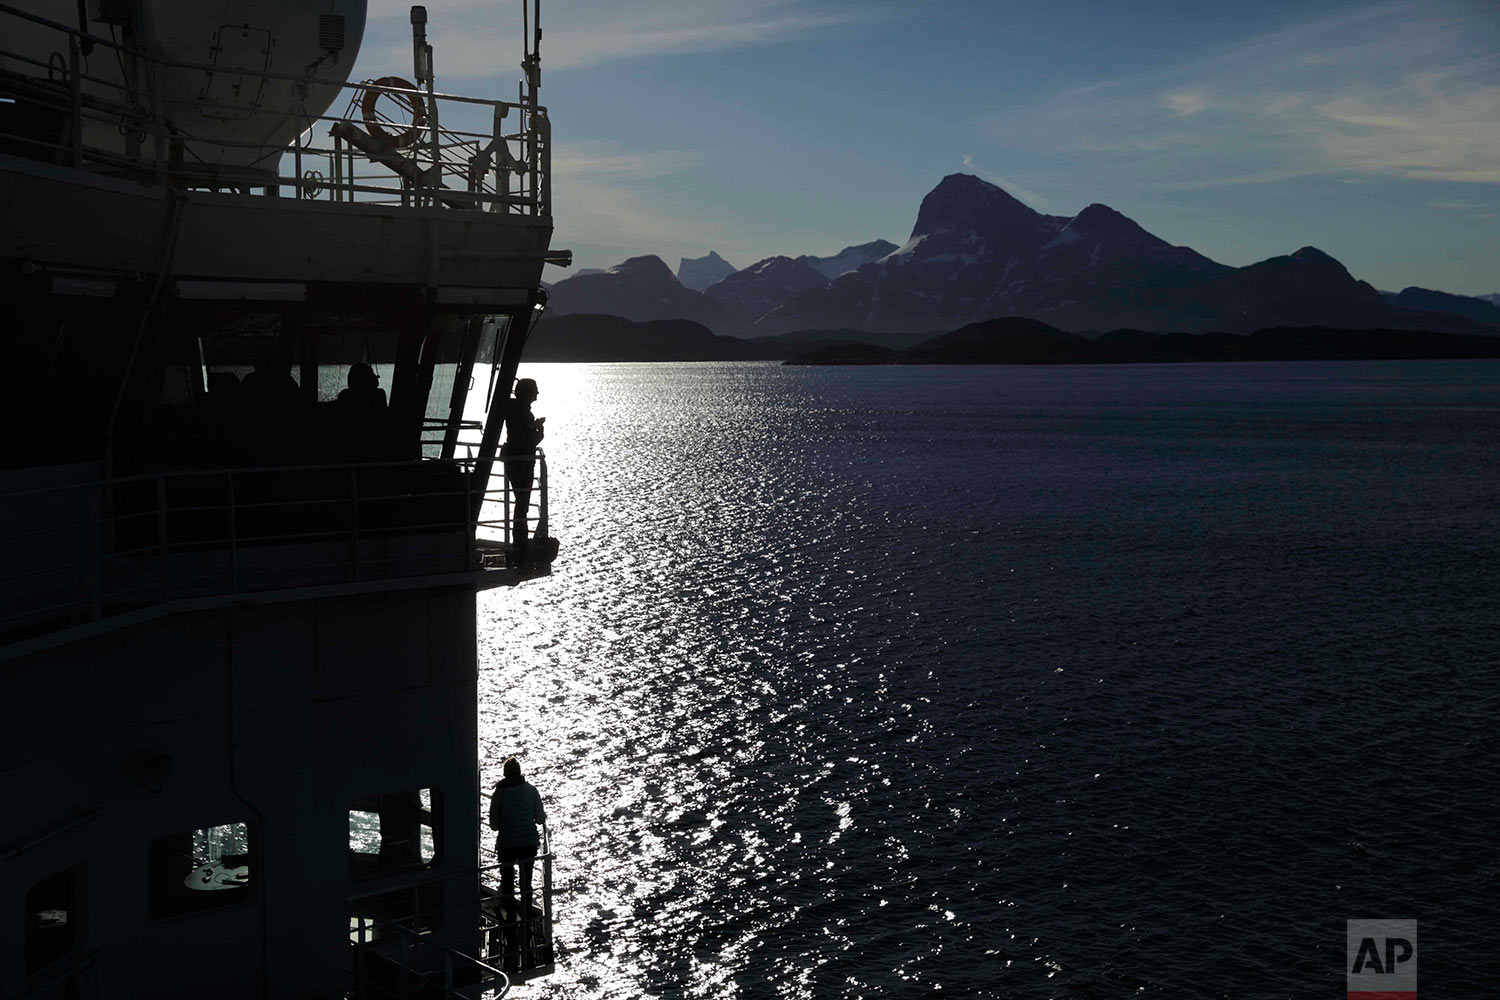  Personnel stand aboard the Finnish icebreaker MSV Nordica as it arrives into Nuuk, Greenland, after traversing the Northwest Passage through the Canadian Arctic Archipelago, Saturday, July 29, 2017. After 24 days at sea and a journey spanning more t